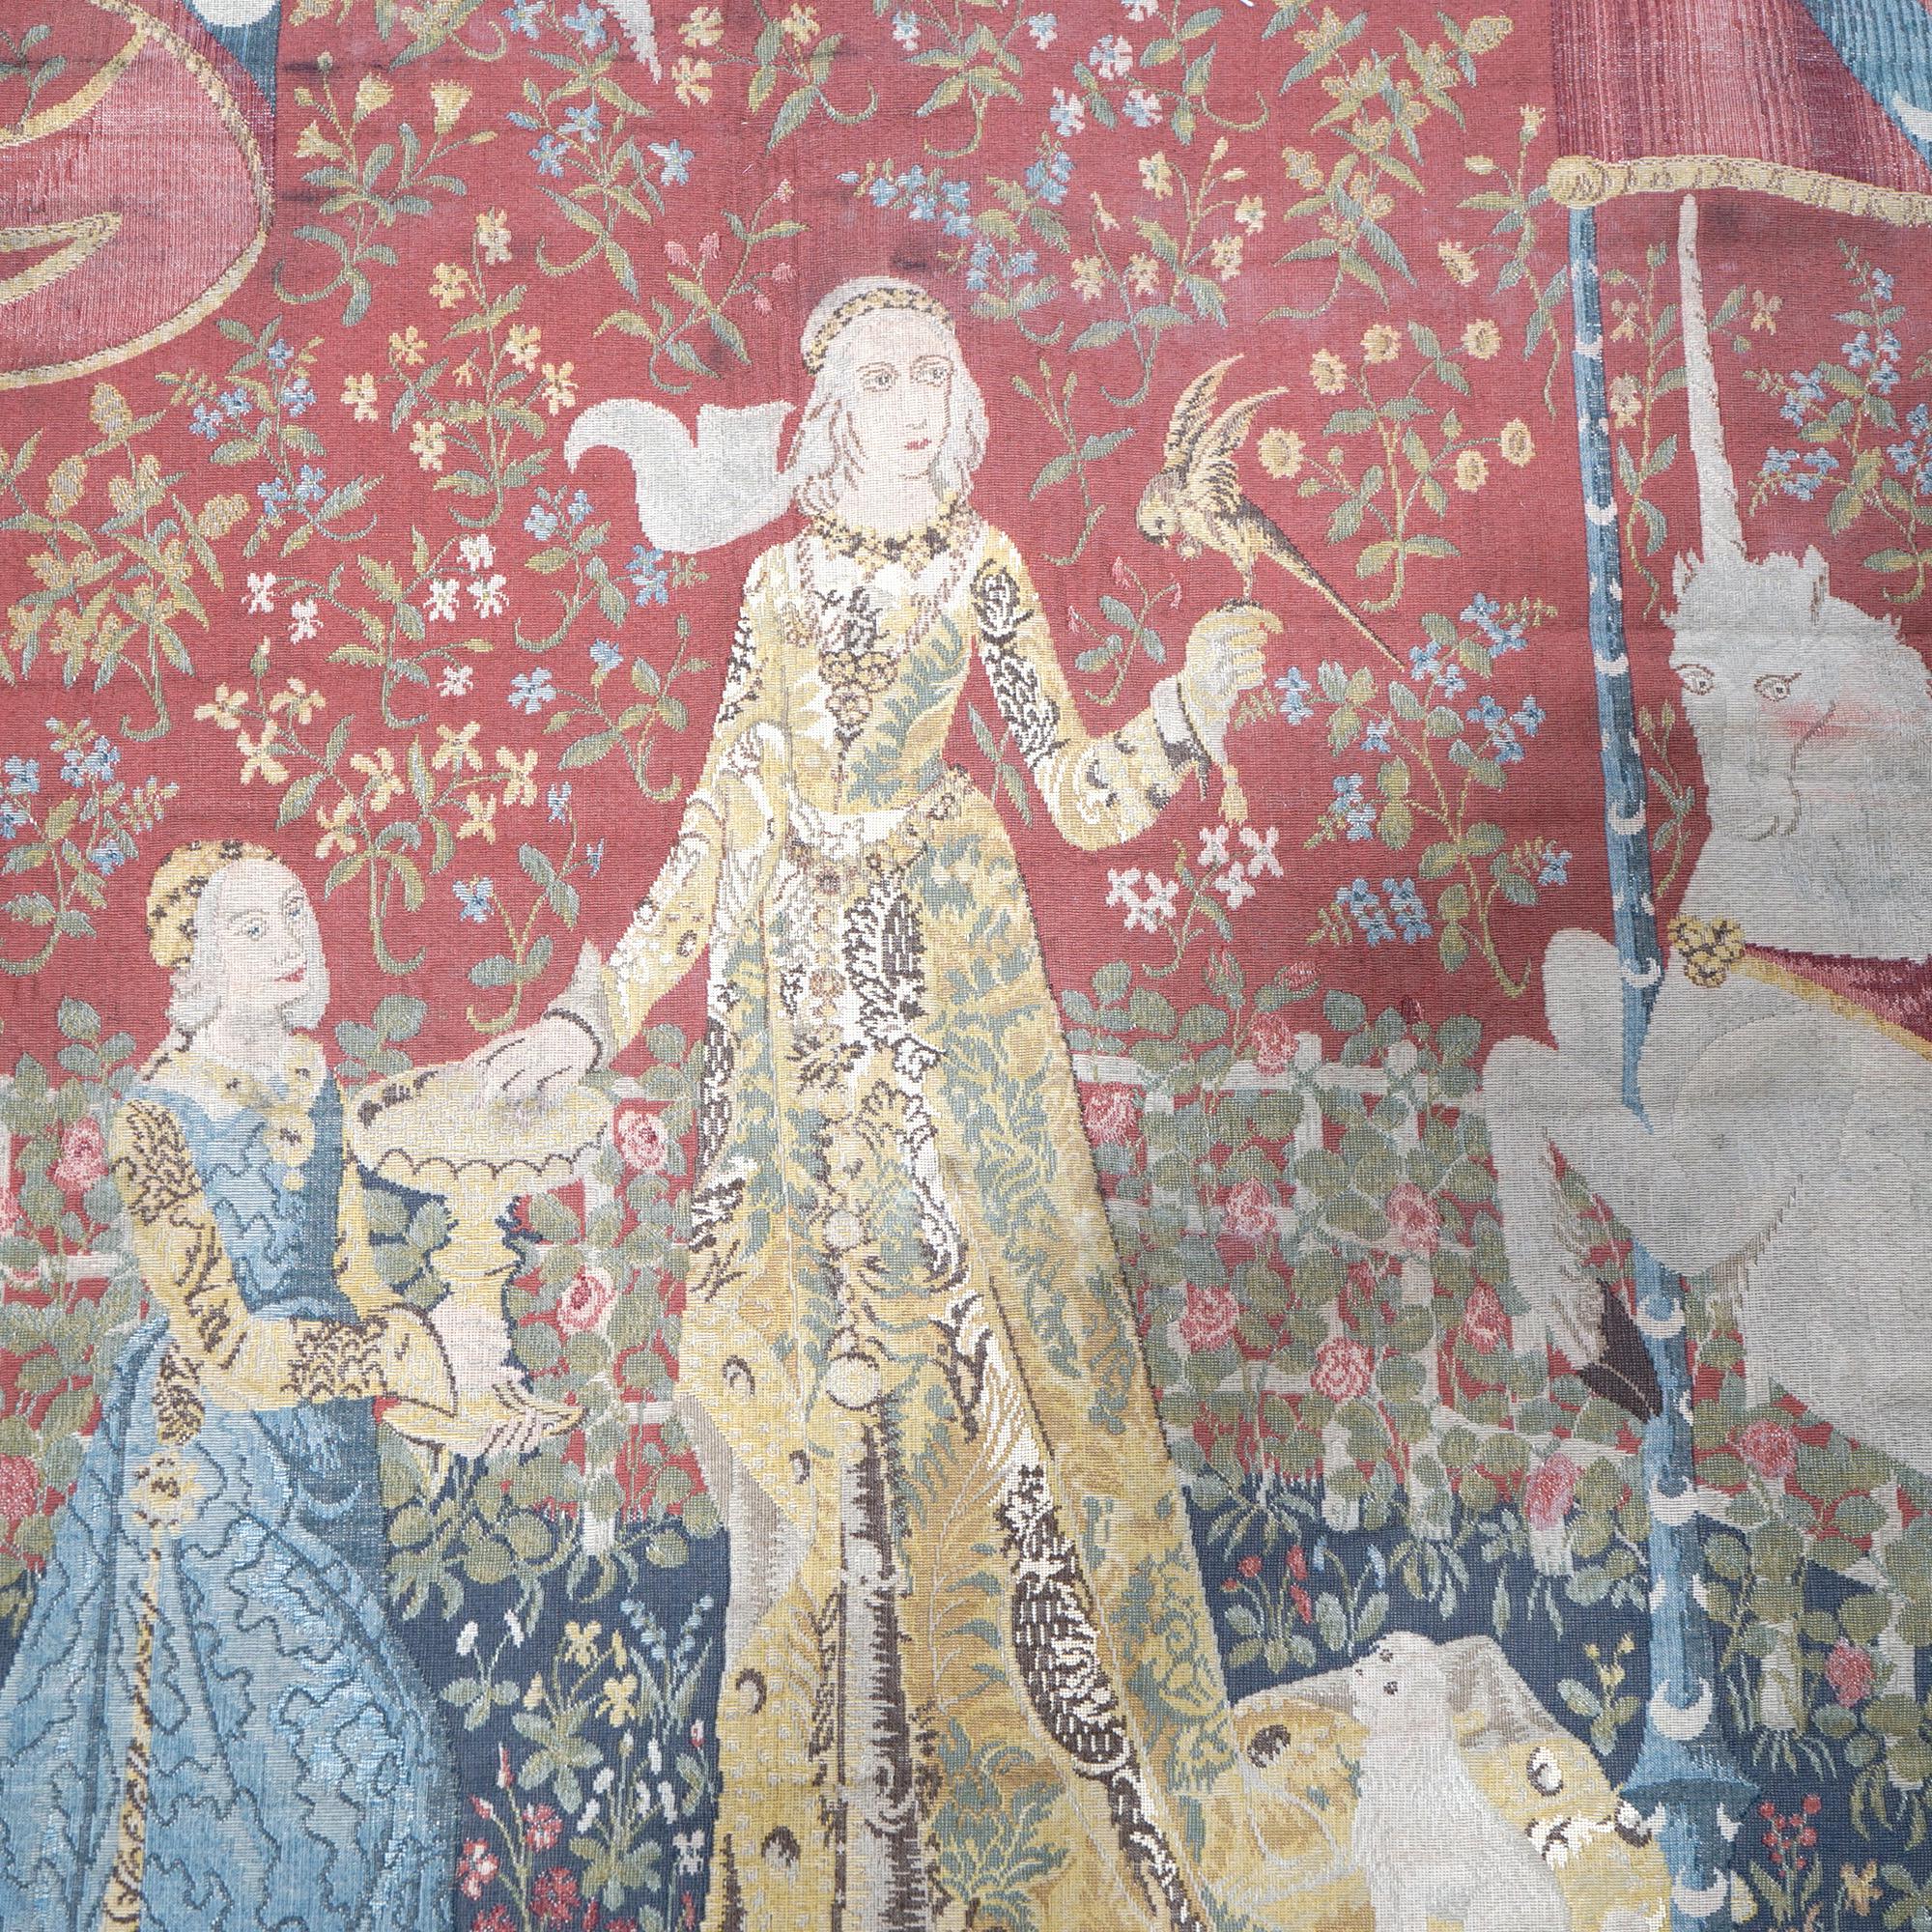 European Antique Continental Wall Tapestry, Lady & the Unicorn Sense of Sight, 19th C